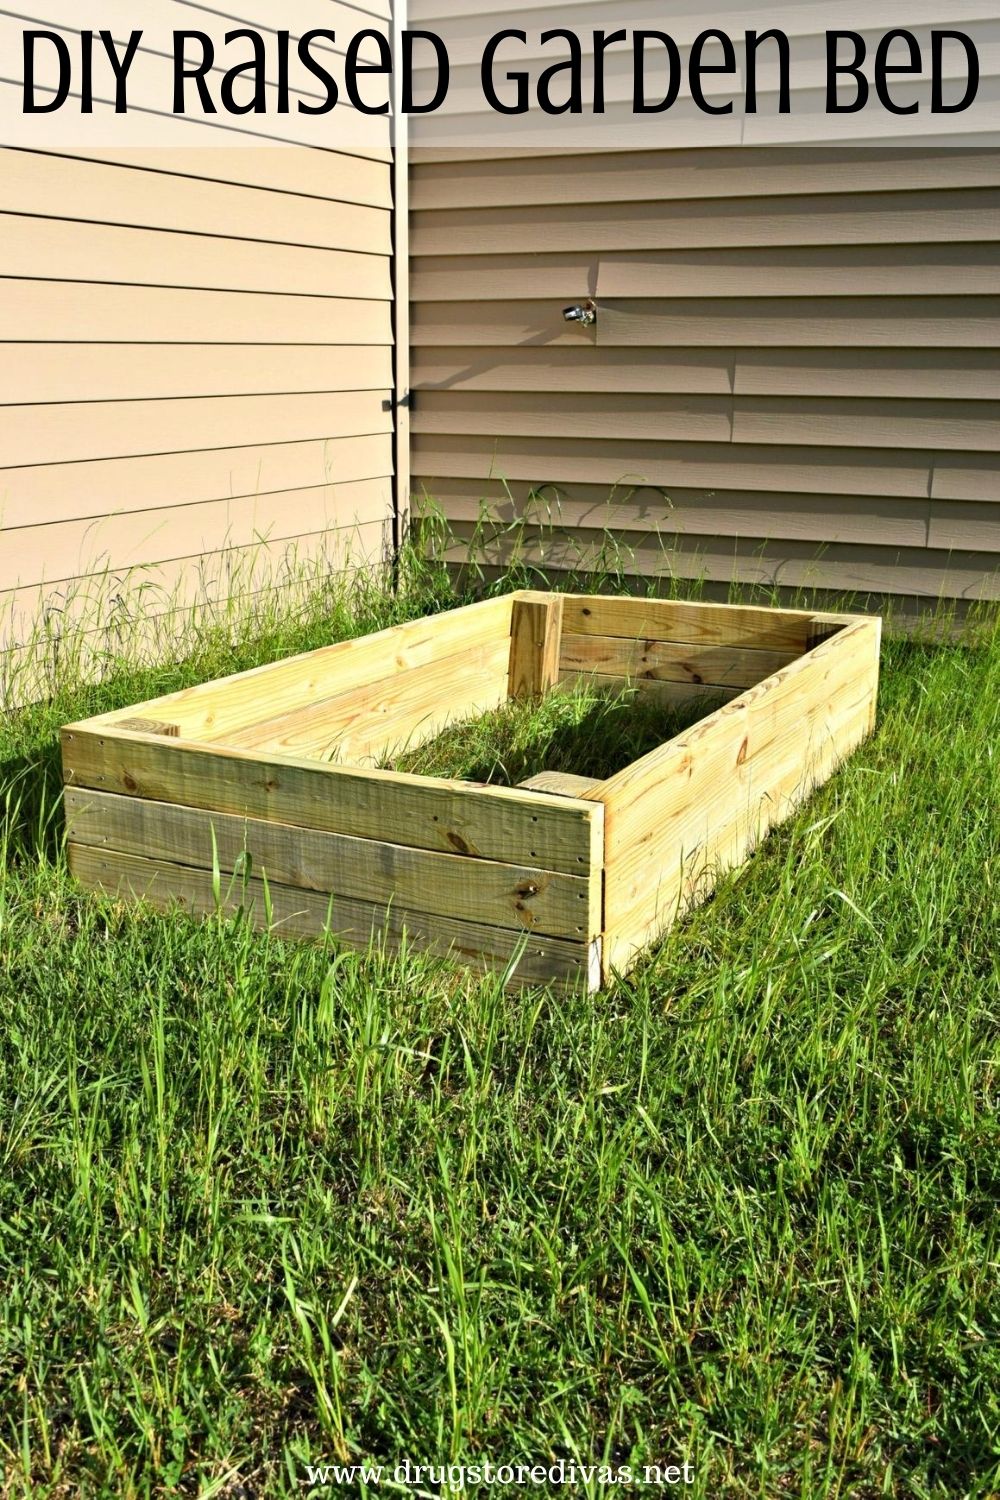 Everyone seems to be picking up gardening. If you're going to stick with it, build a raised garden bed. Find out how in this post.